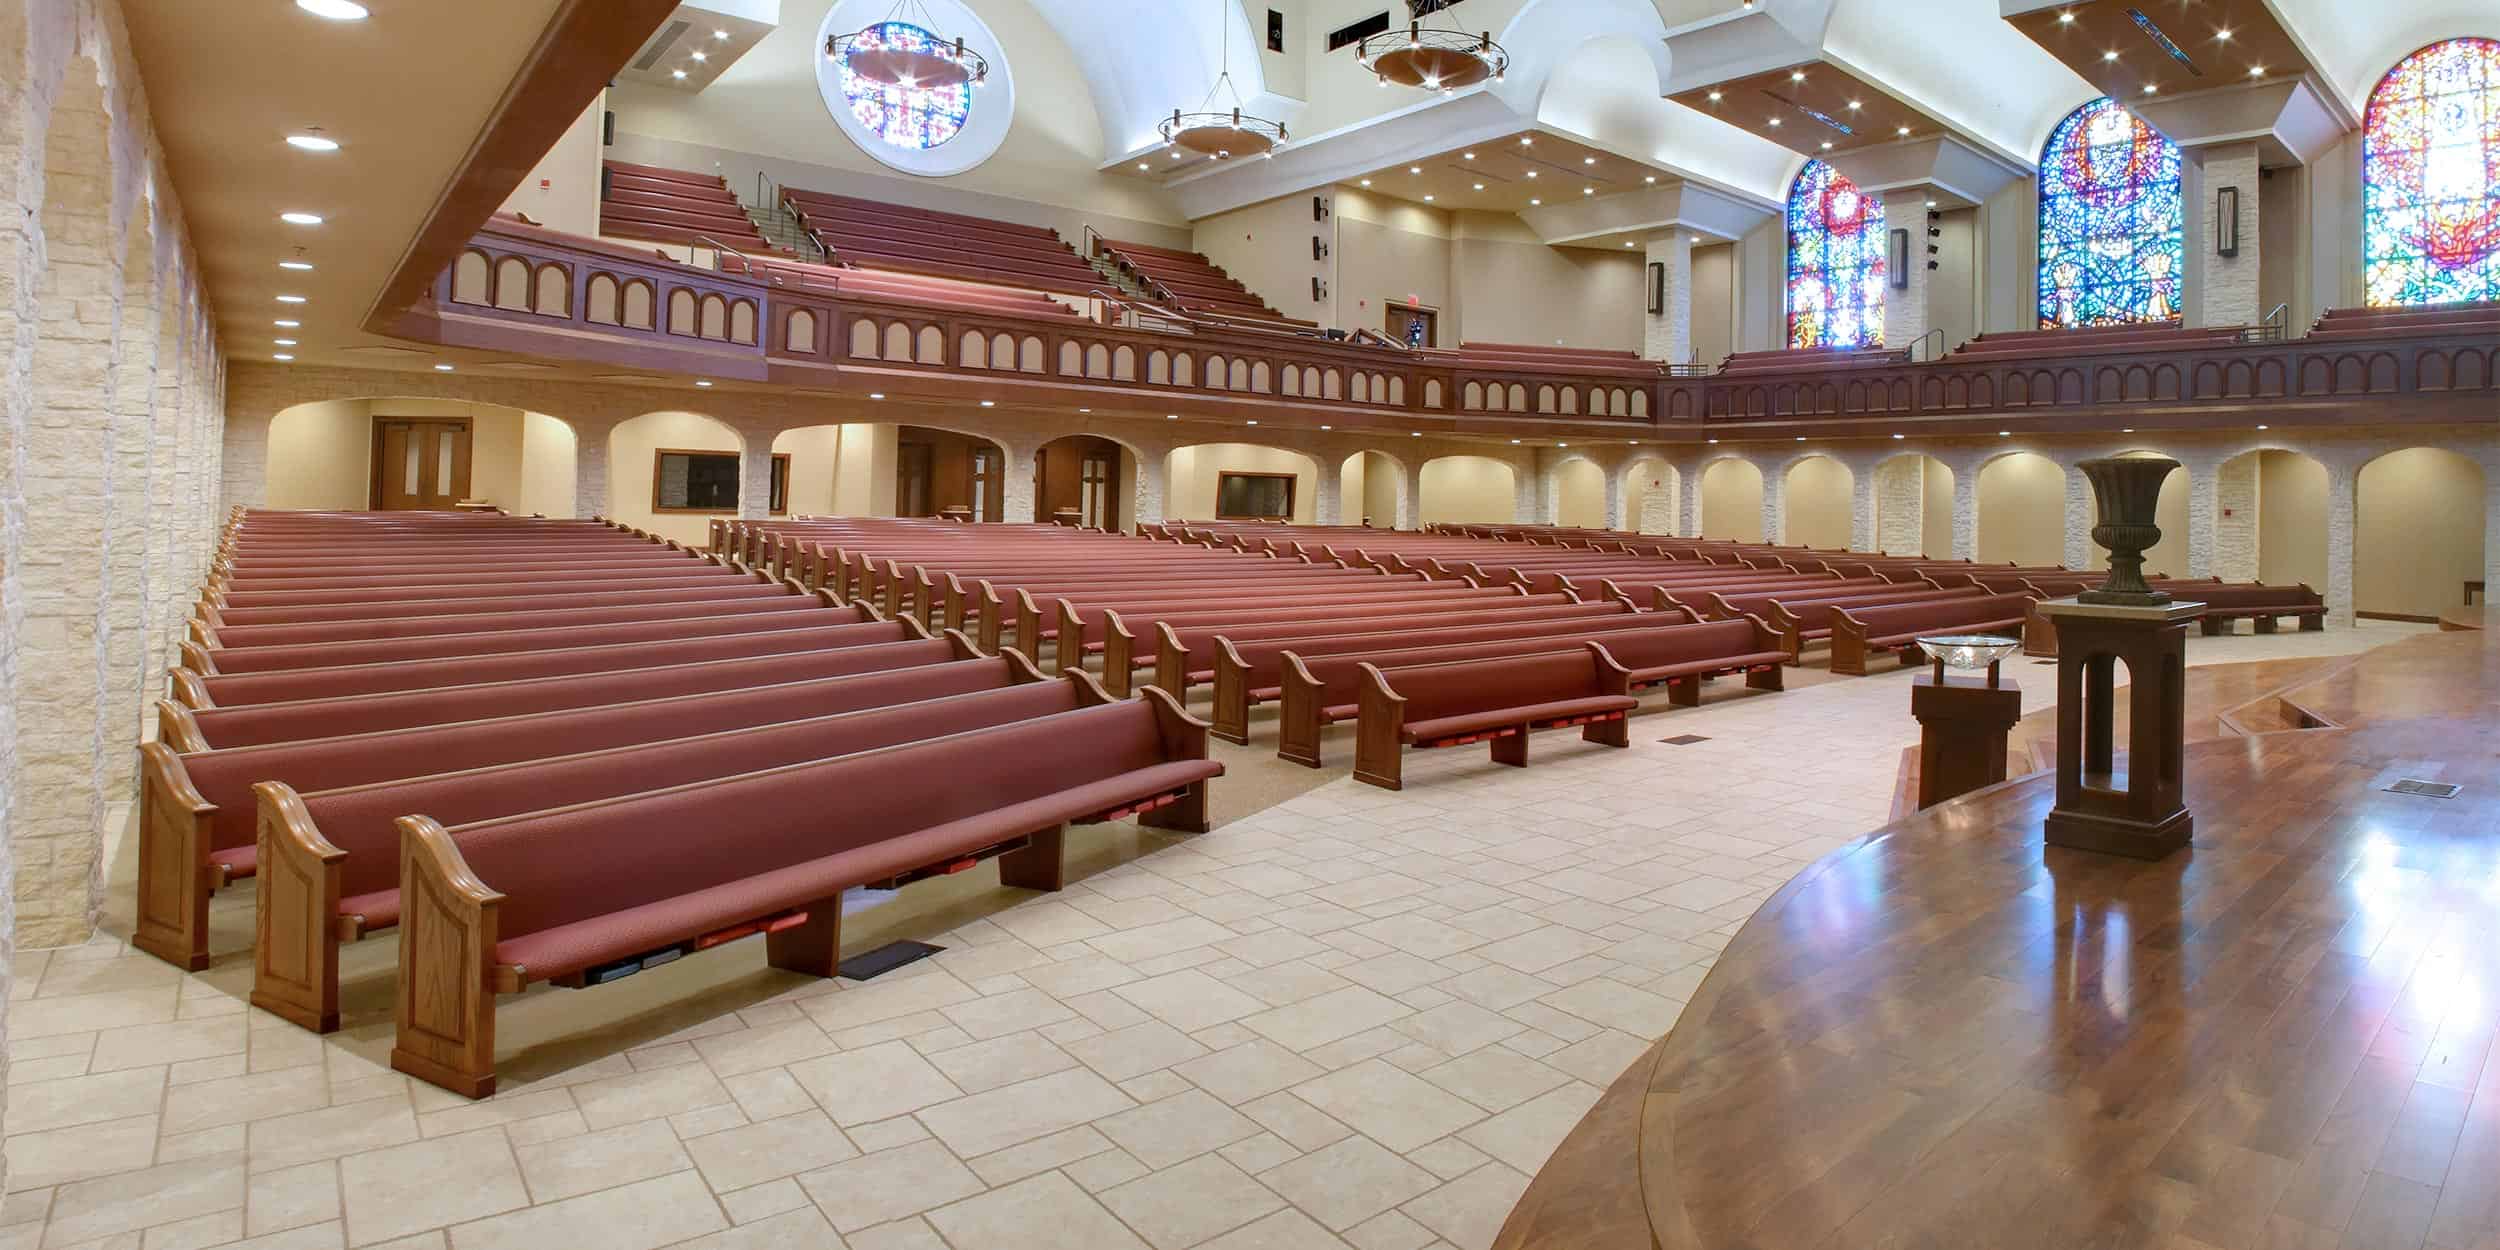 Fully upholstered church furniture including pews from Sauder.